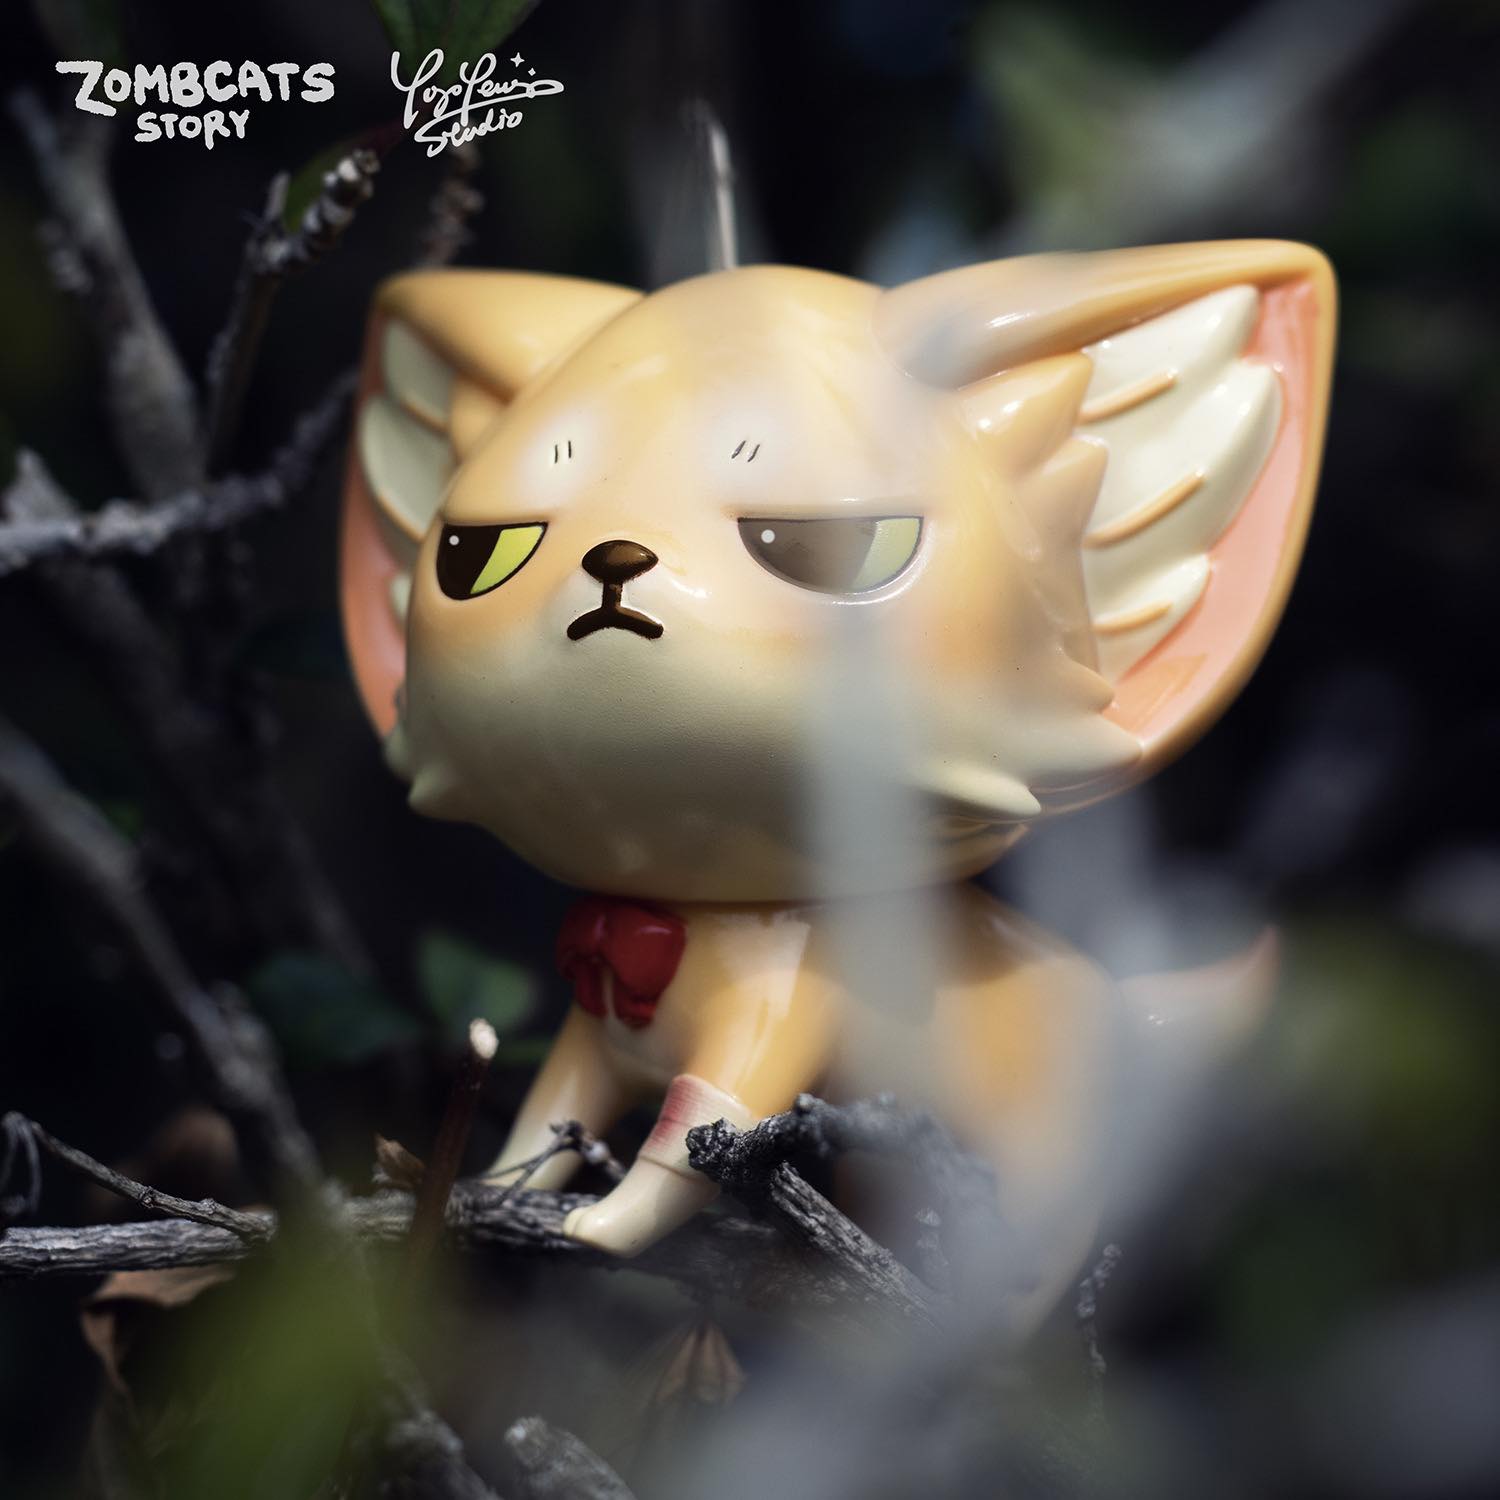 A limited edition Zombcat figurine perched on a tree branch. Soft vinyl, 7cm, limited to 100pcs. By Morimei X Yoyo Yeung Studio. From Strangecat Toys.